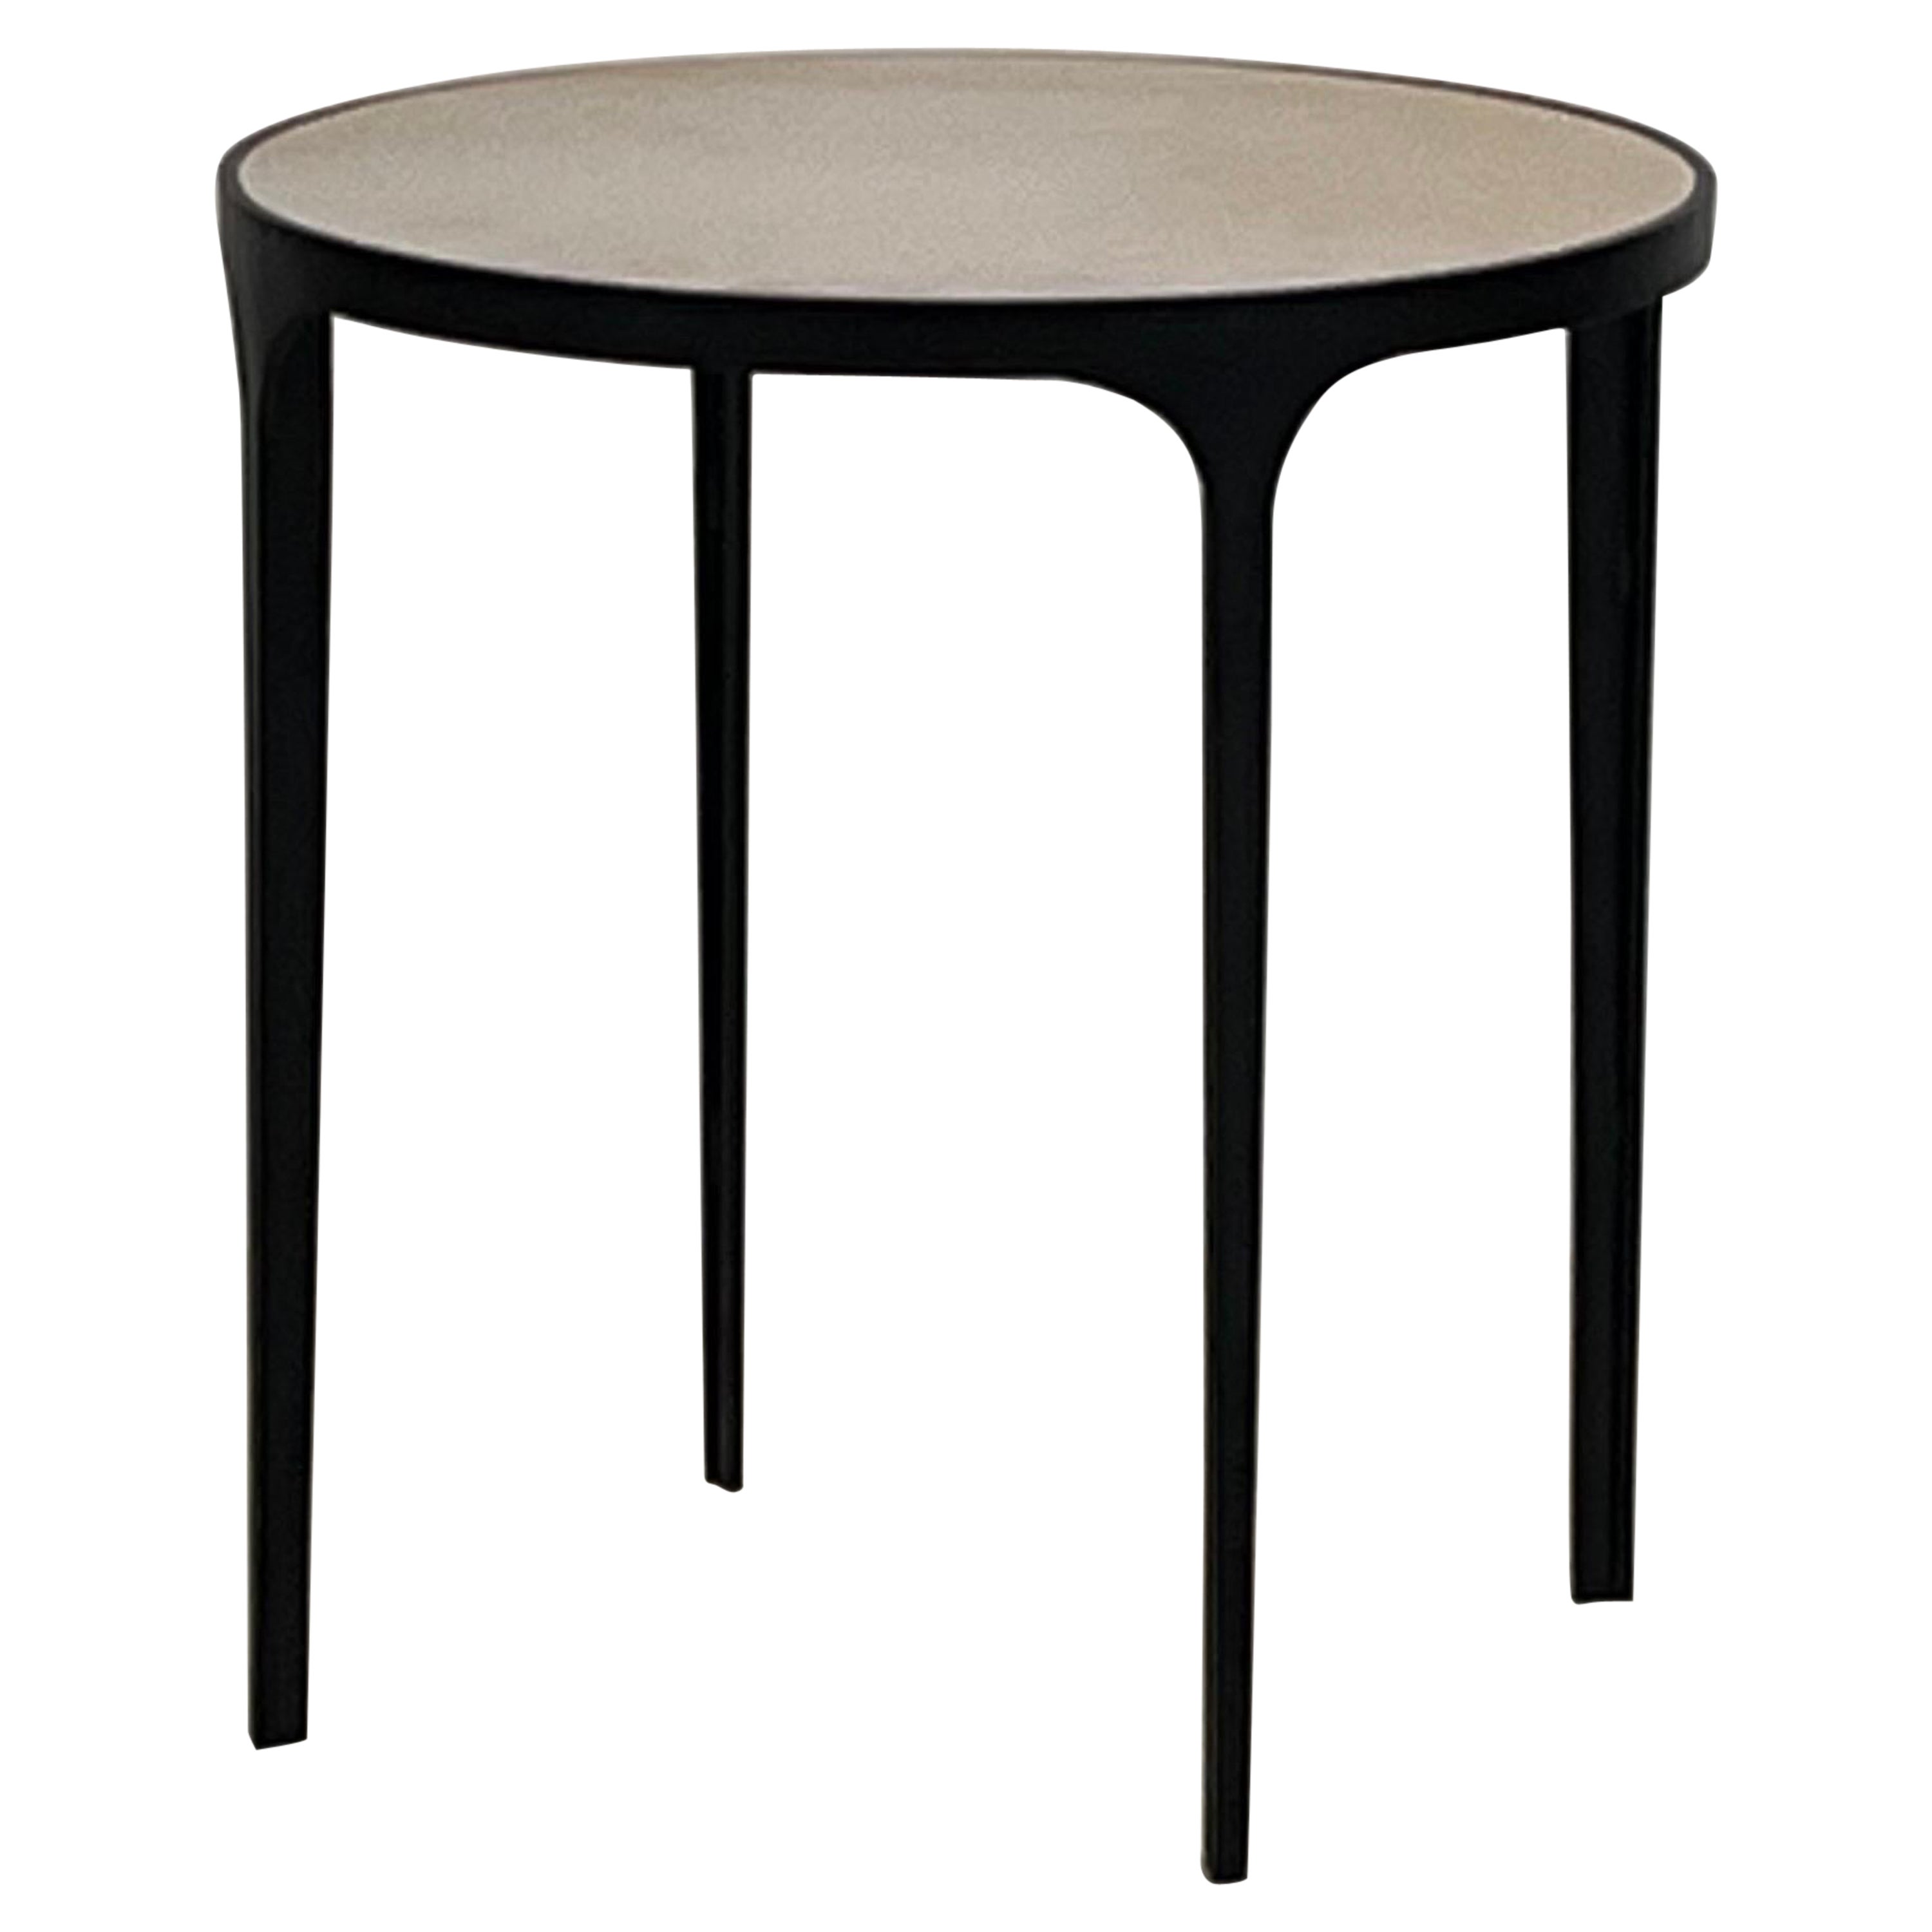 The 'Esquisse' Round Parchment Side Table by Design Frères For Sale